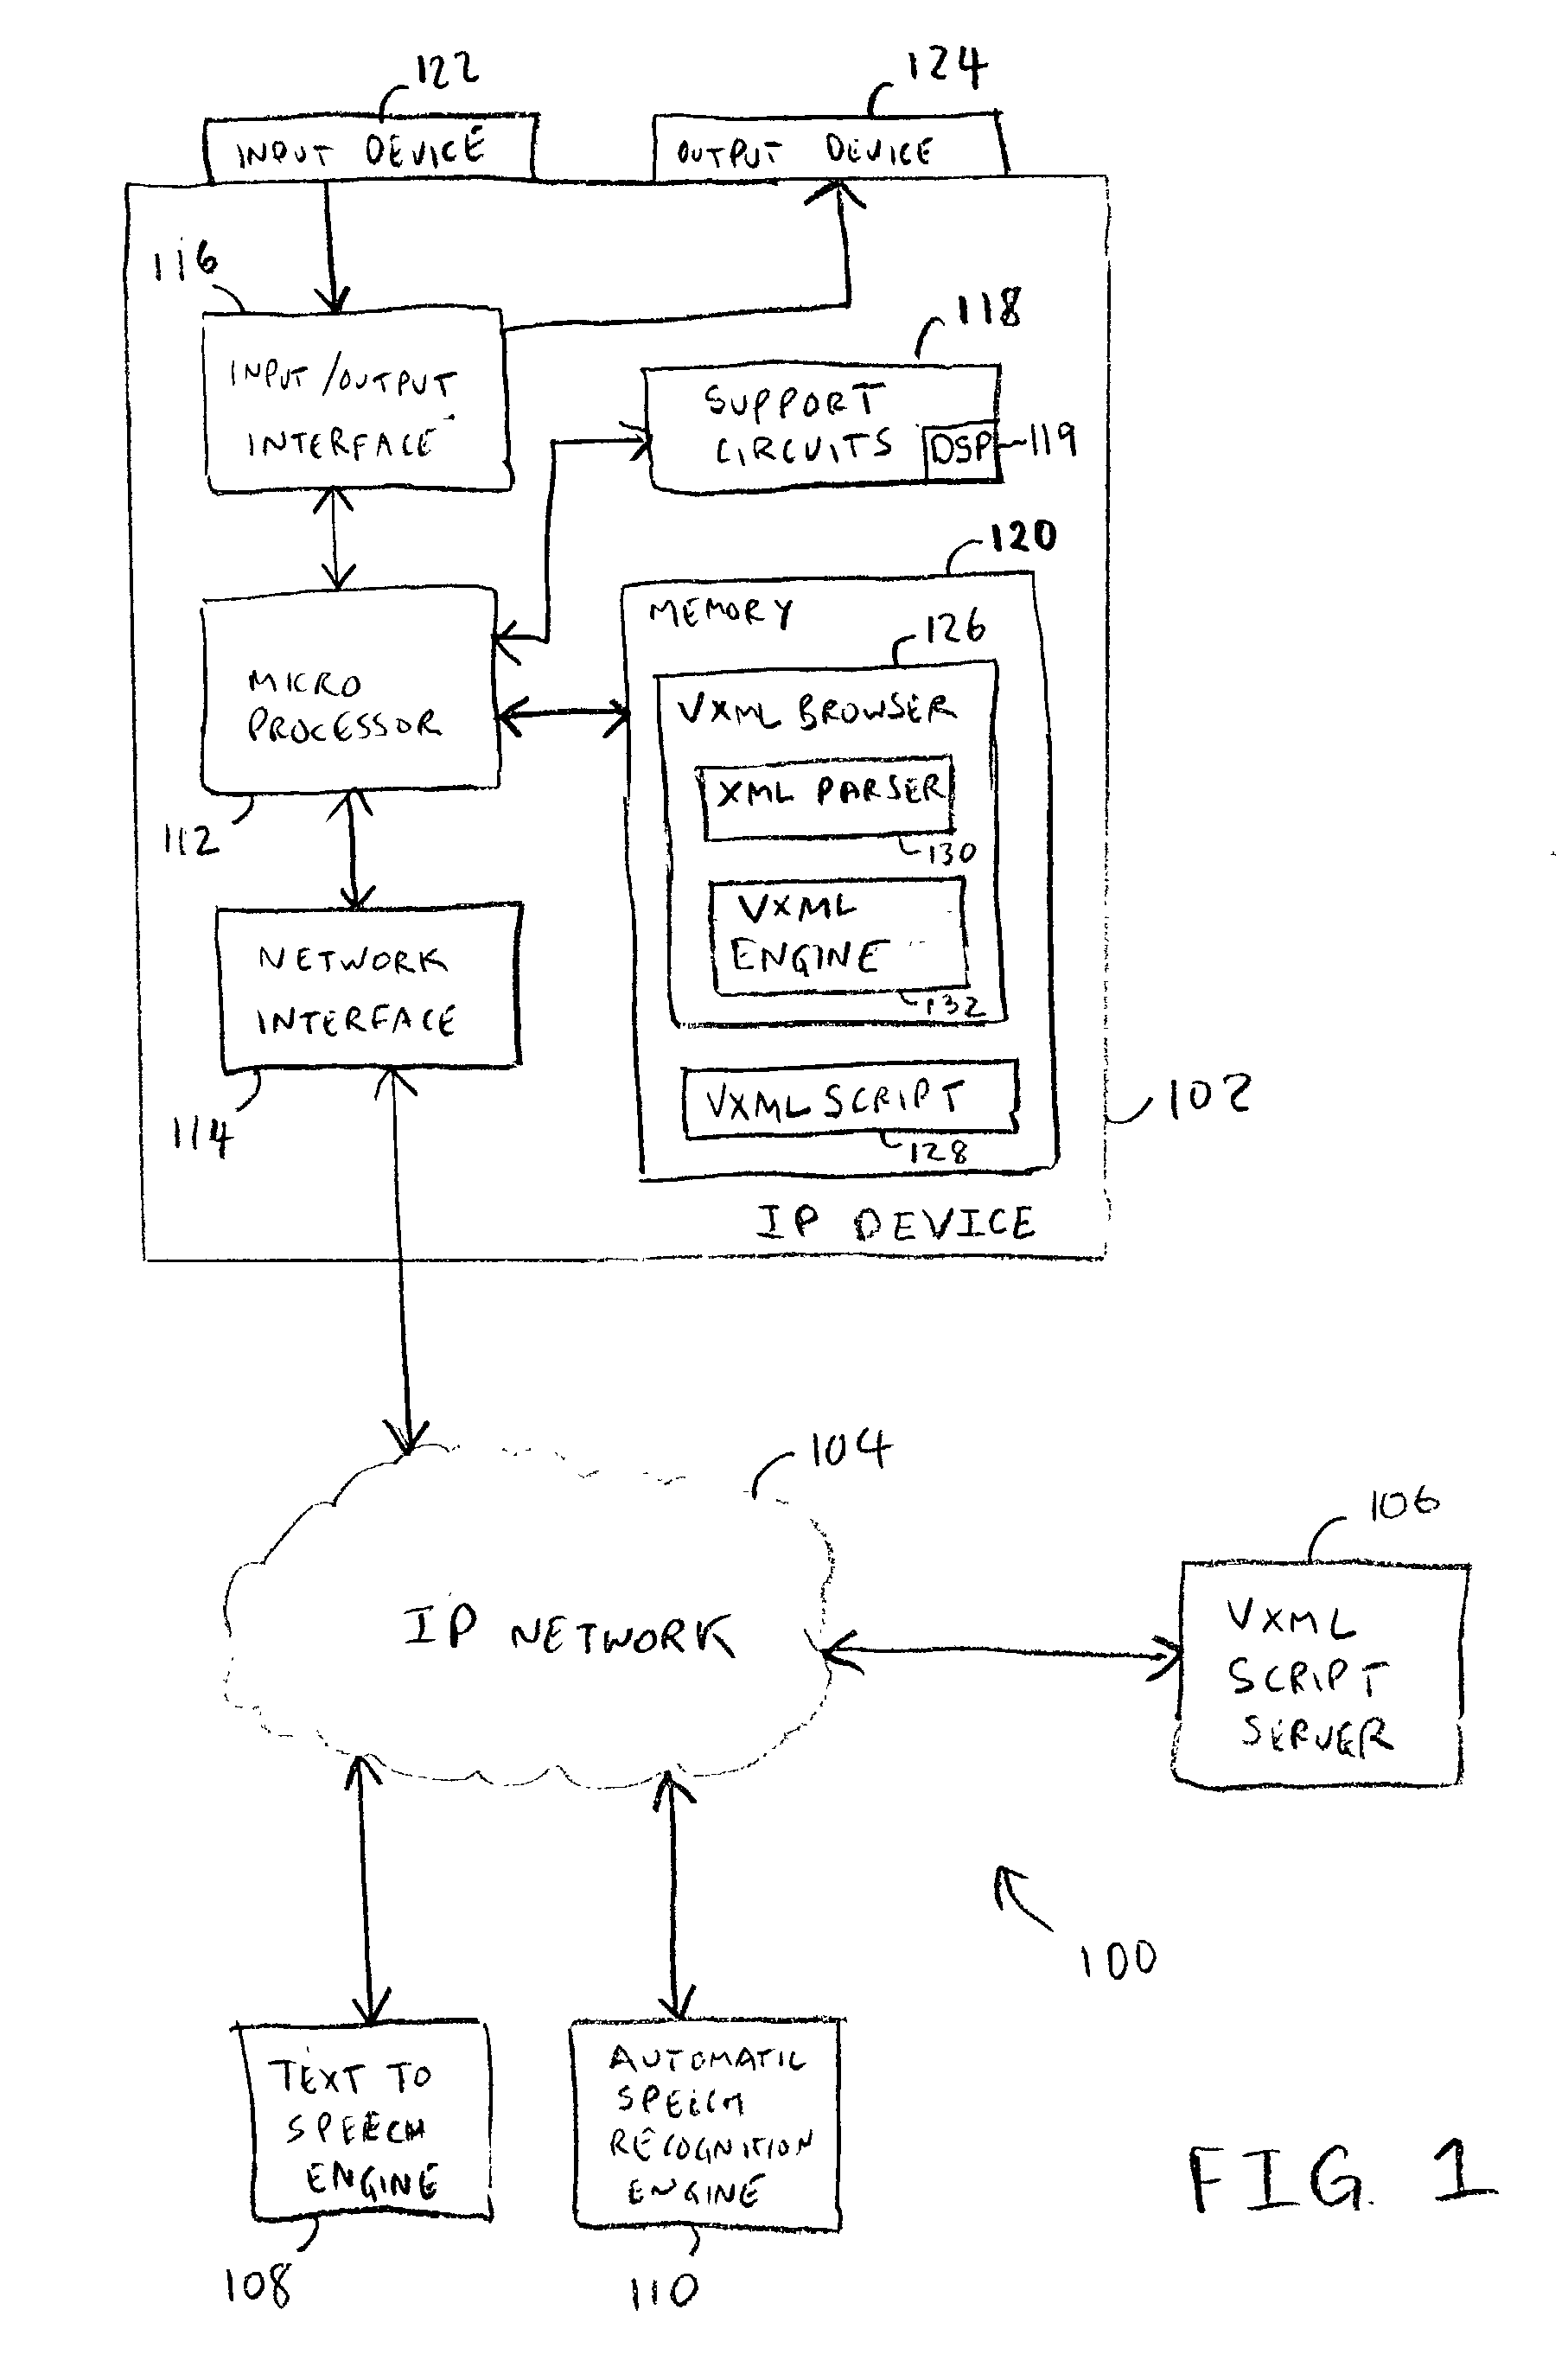 Method of implementing a VXML application into an IP device and an IP device having VXML capability